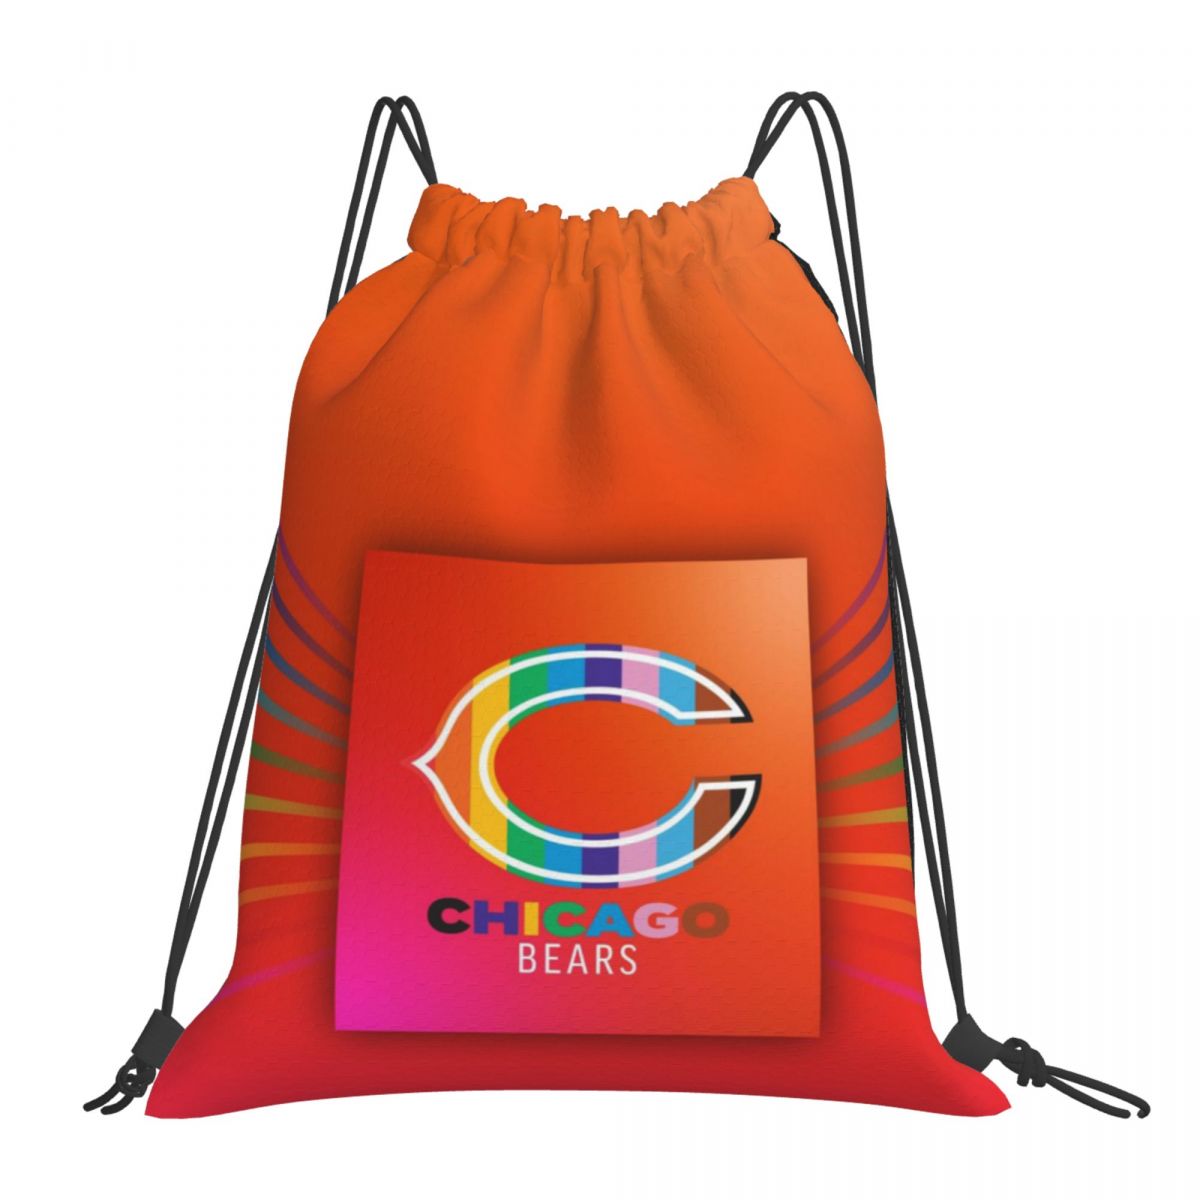 Chicago Bears Pride Month Drawstring Bags for School Gym